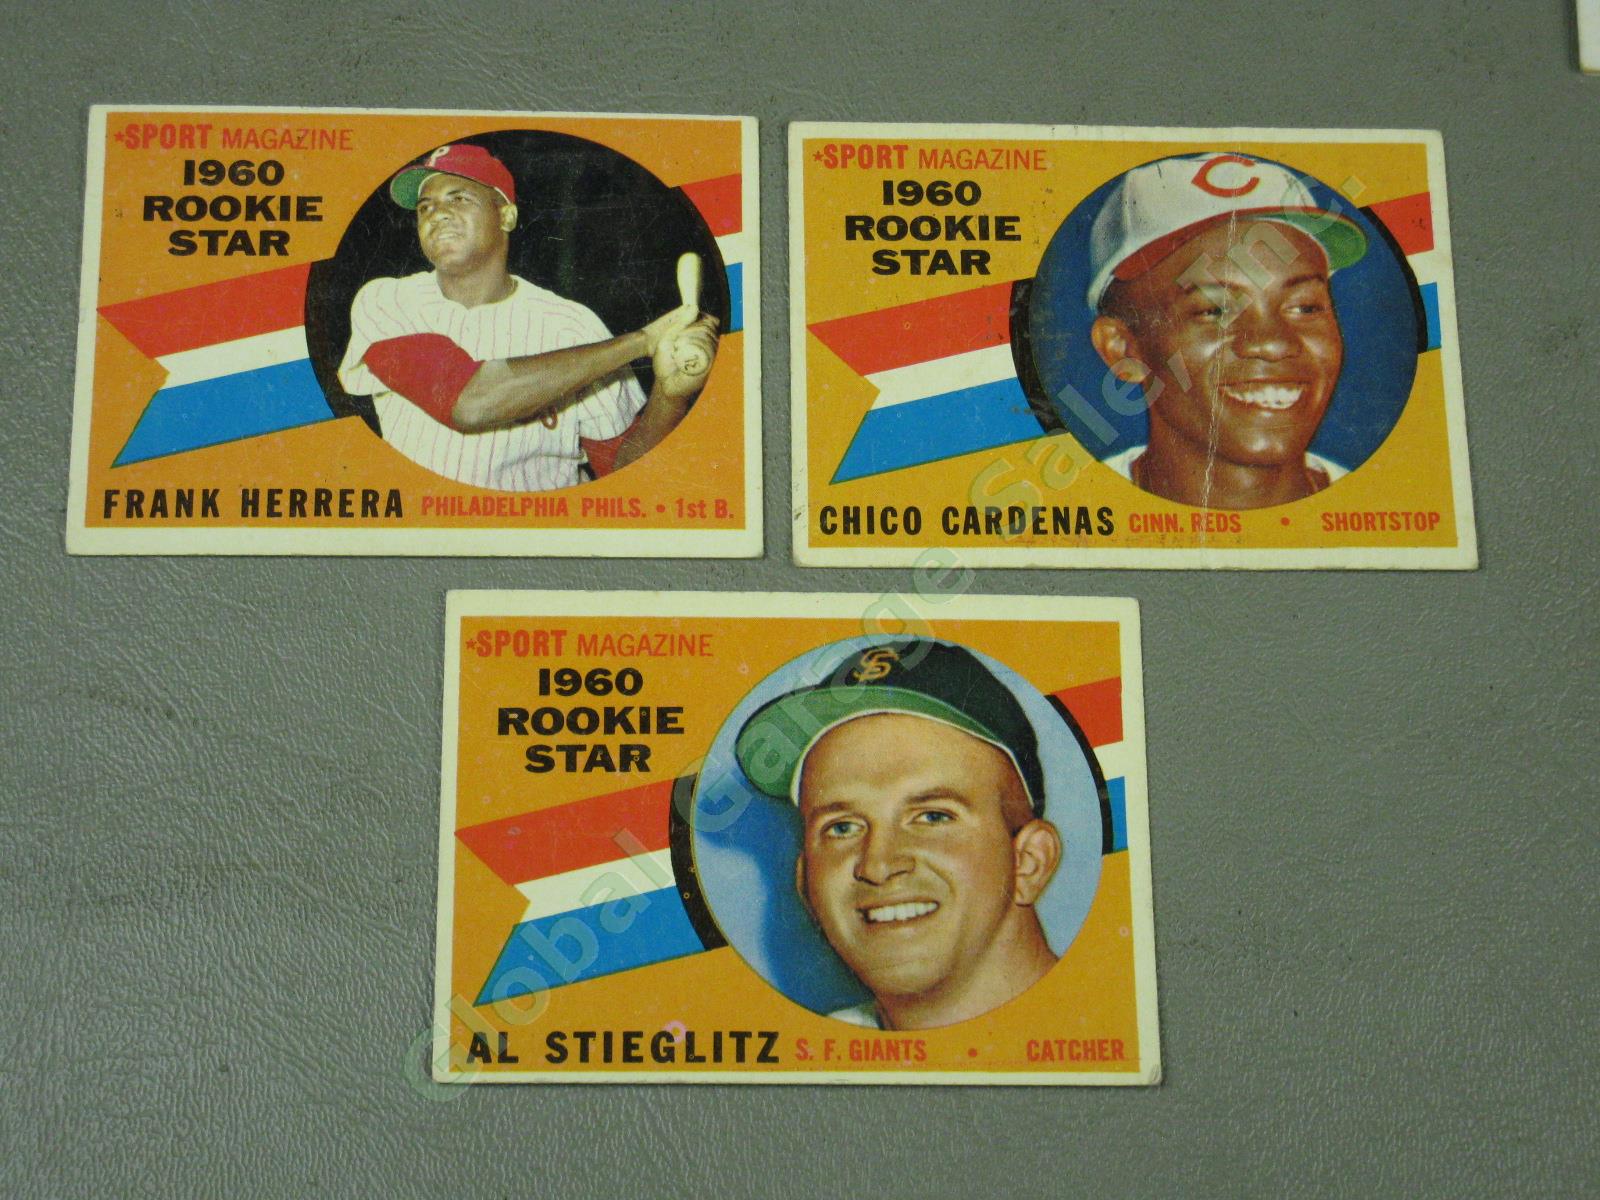 248 Vintage 1960 1960s Topps Baseball Card Lot Rookie Stars Teams Managers NR! 4